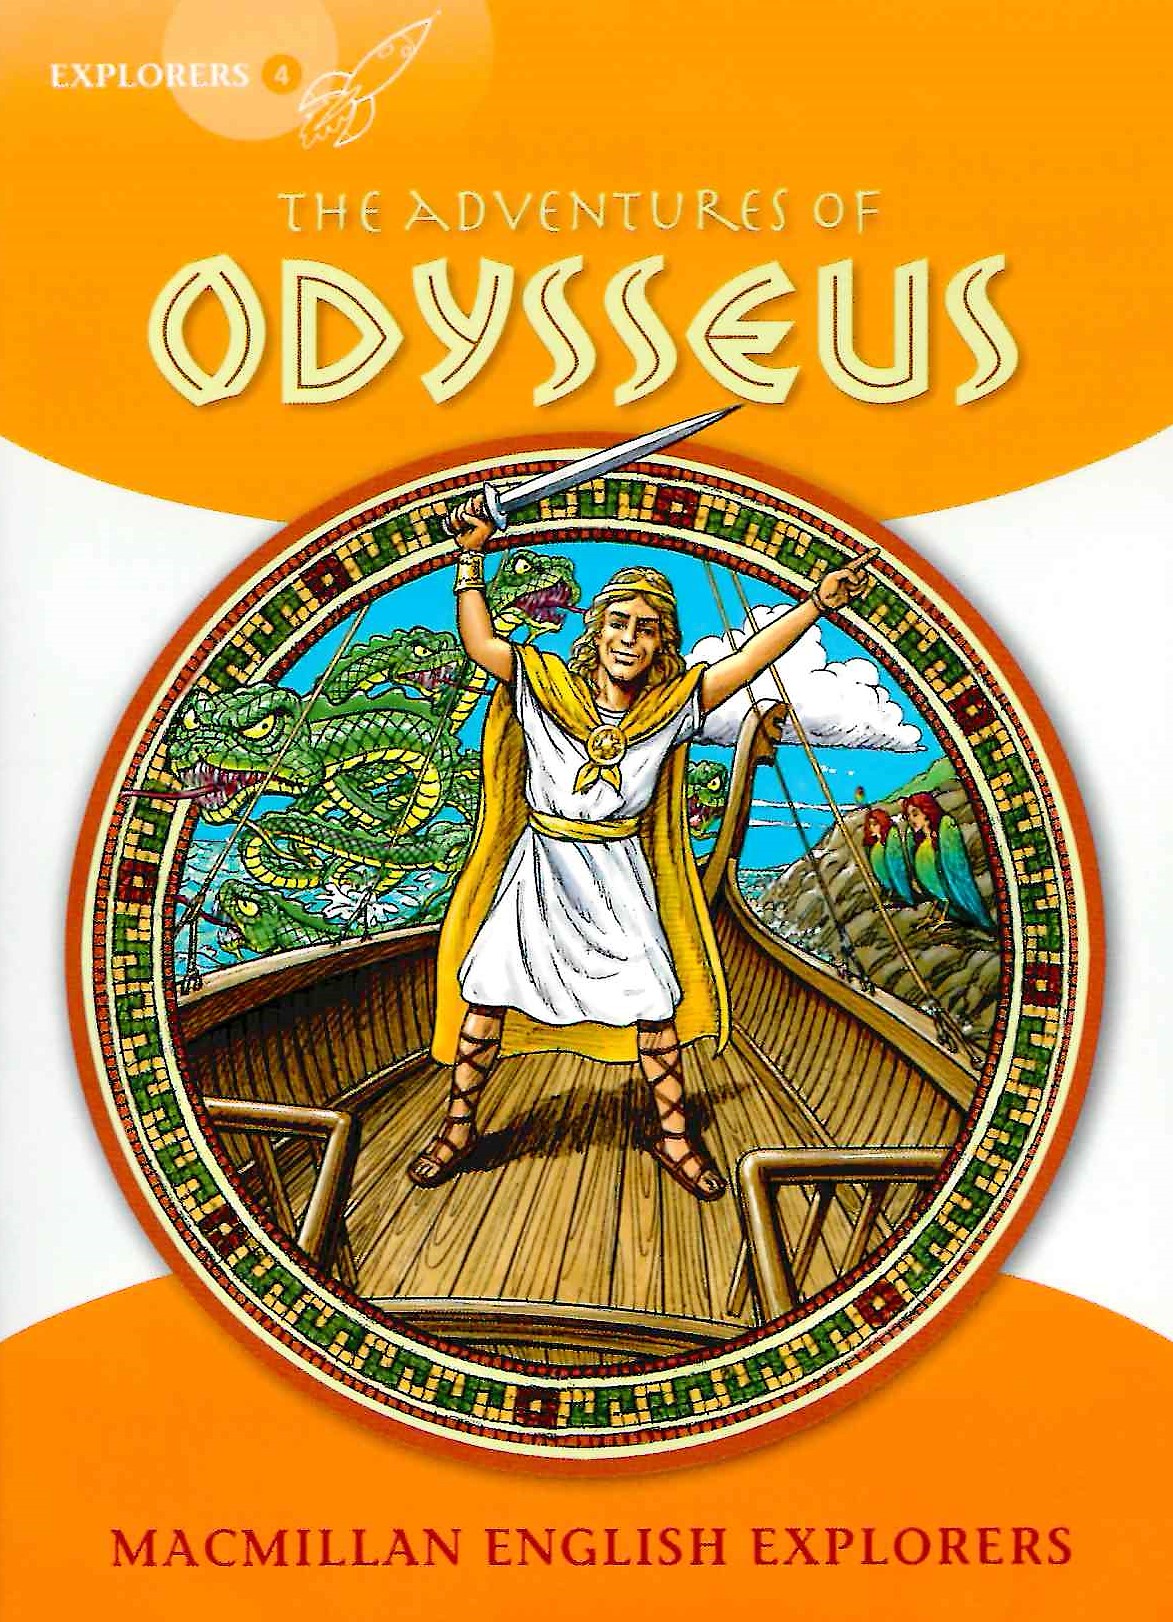 Young Explorers 4 The Adventures of Odysseus